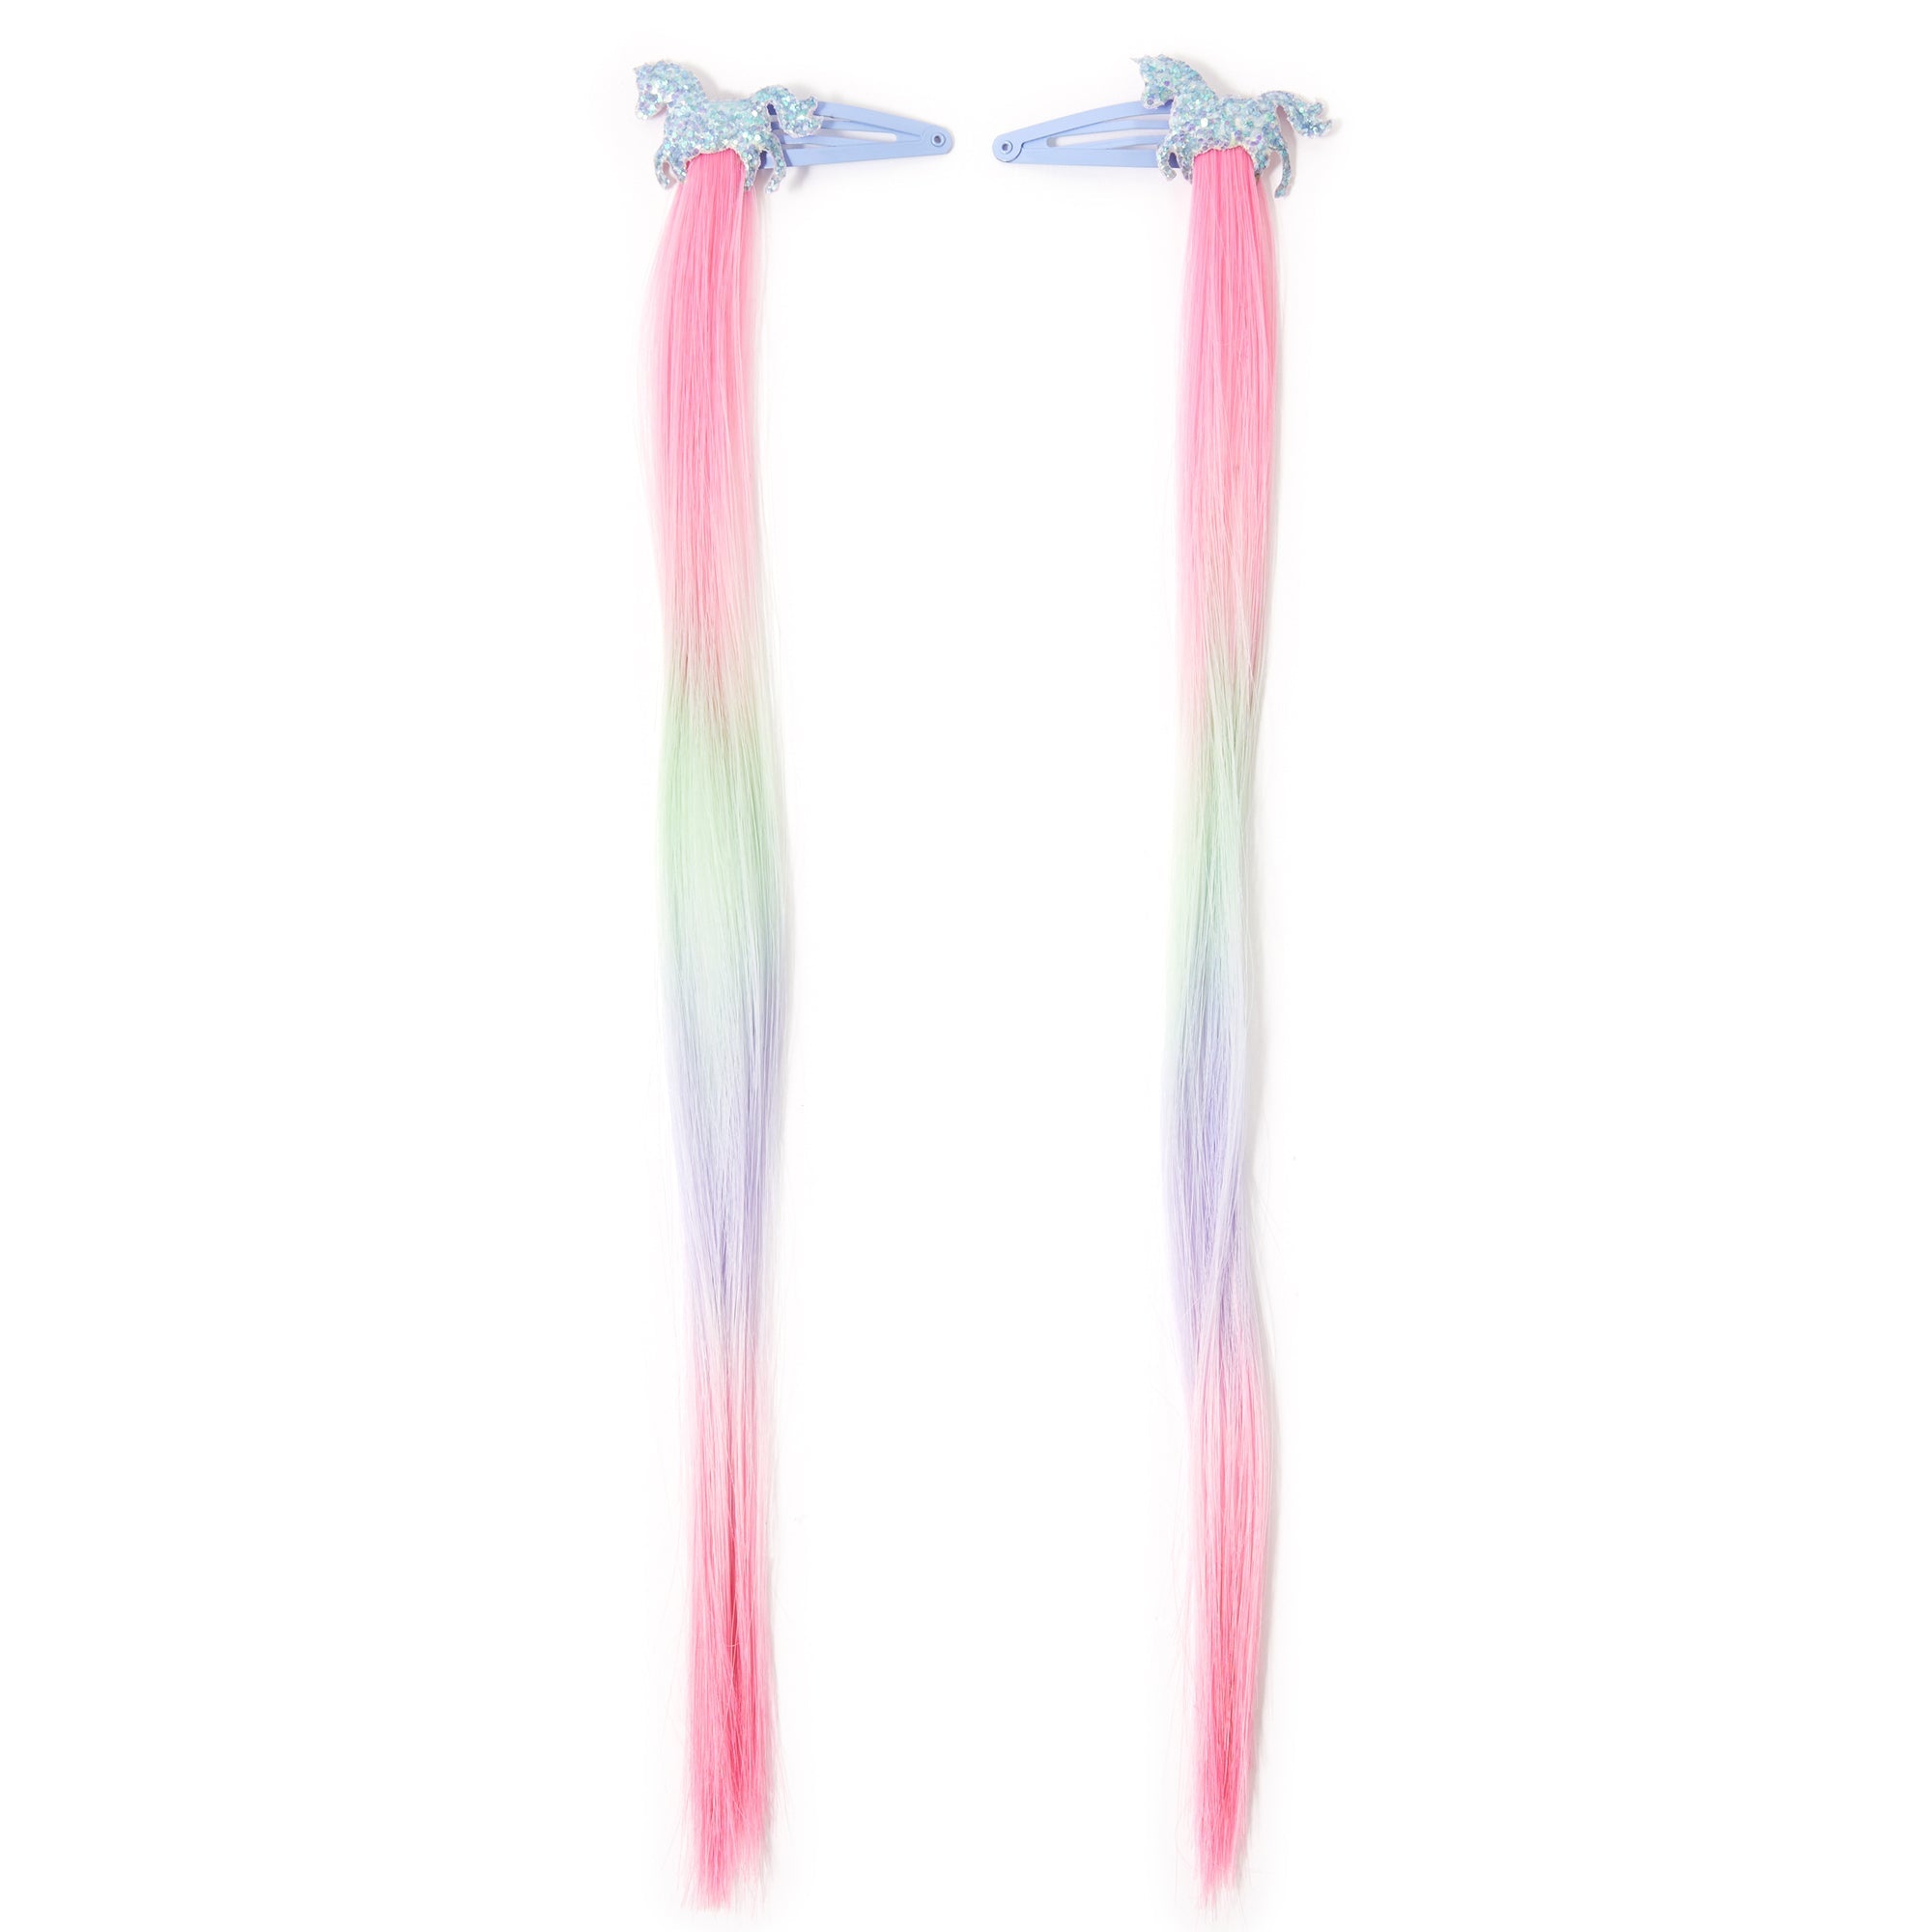 Fake Hair Unicorn Ombre Extensions